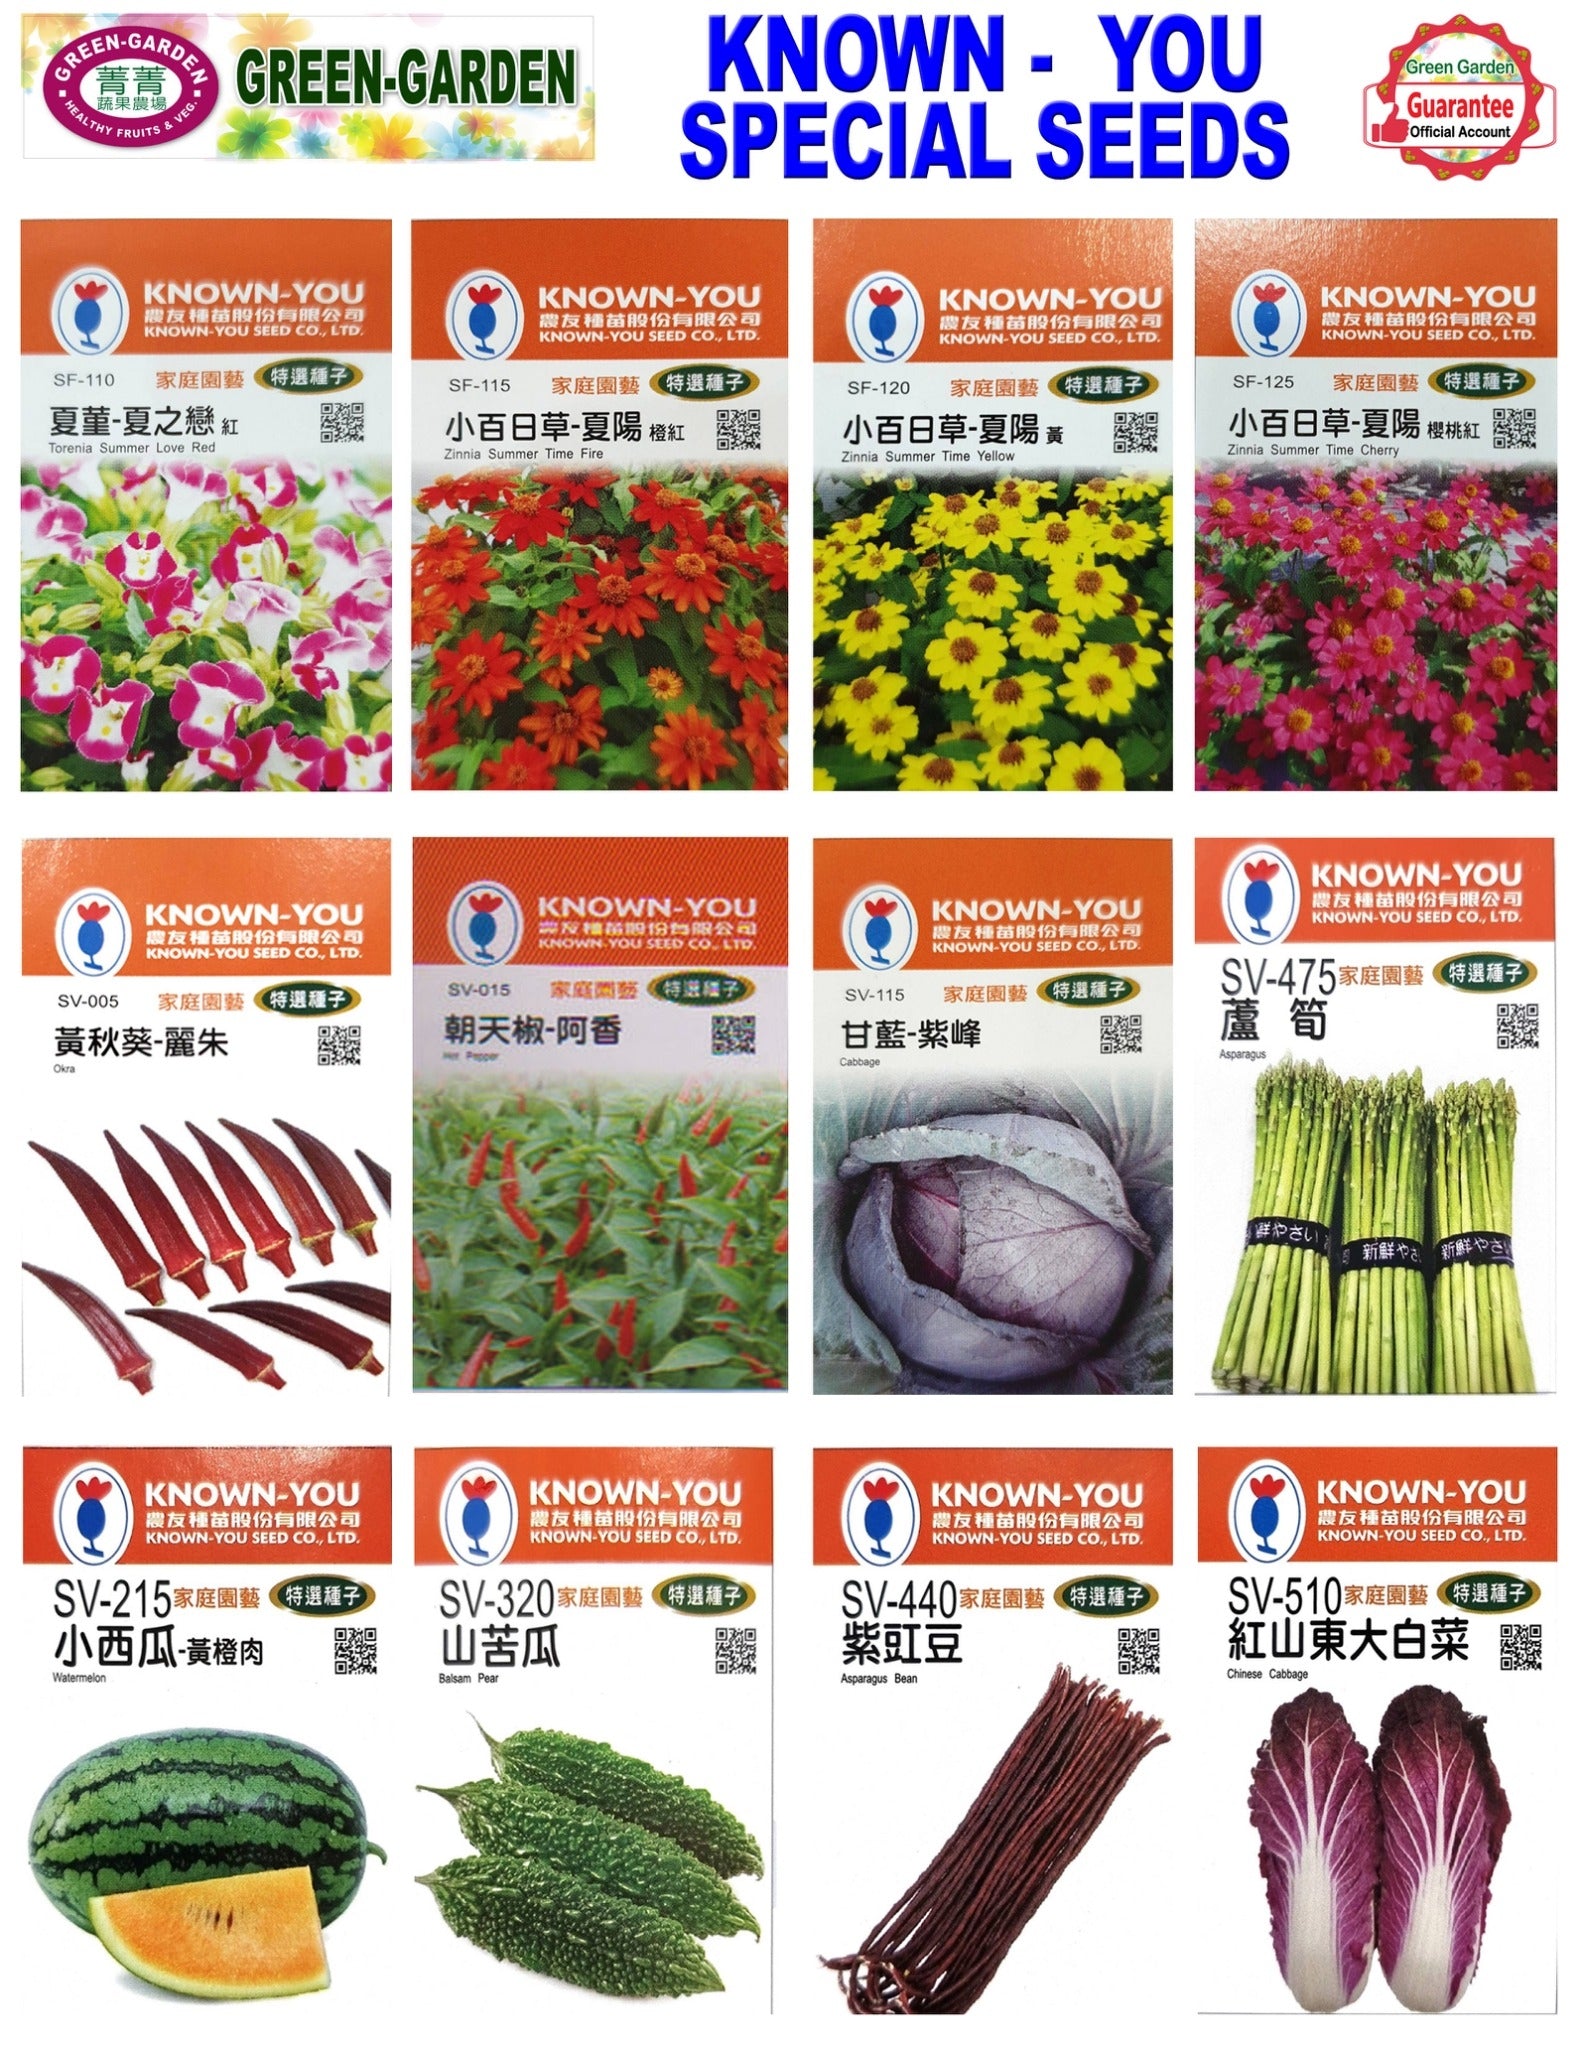 Known You Special Seeds (SV-485 Lettuce (red))